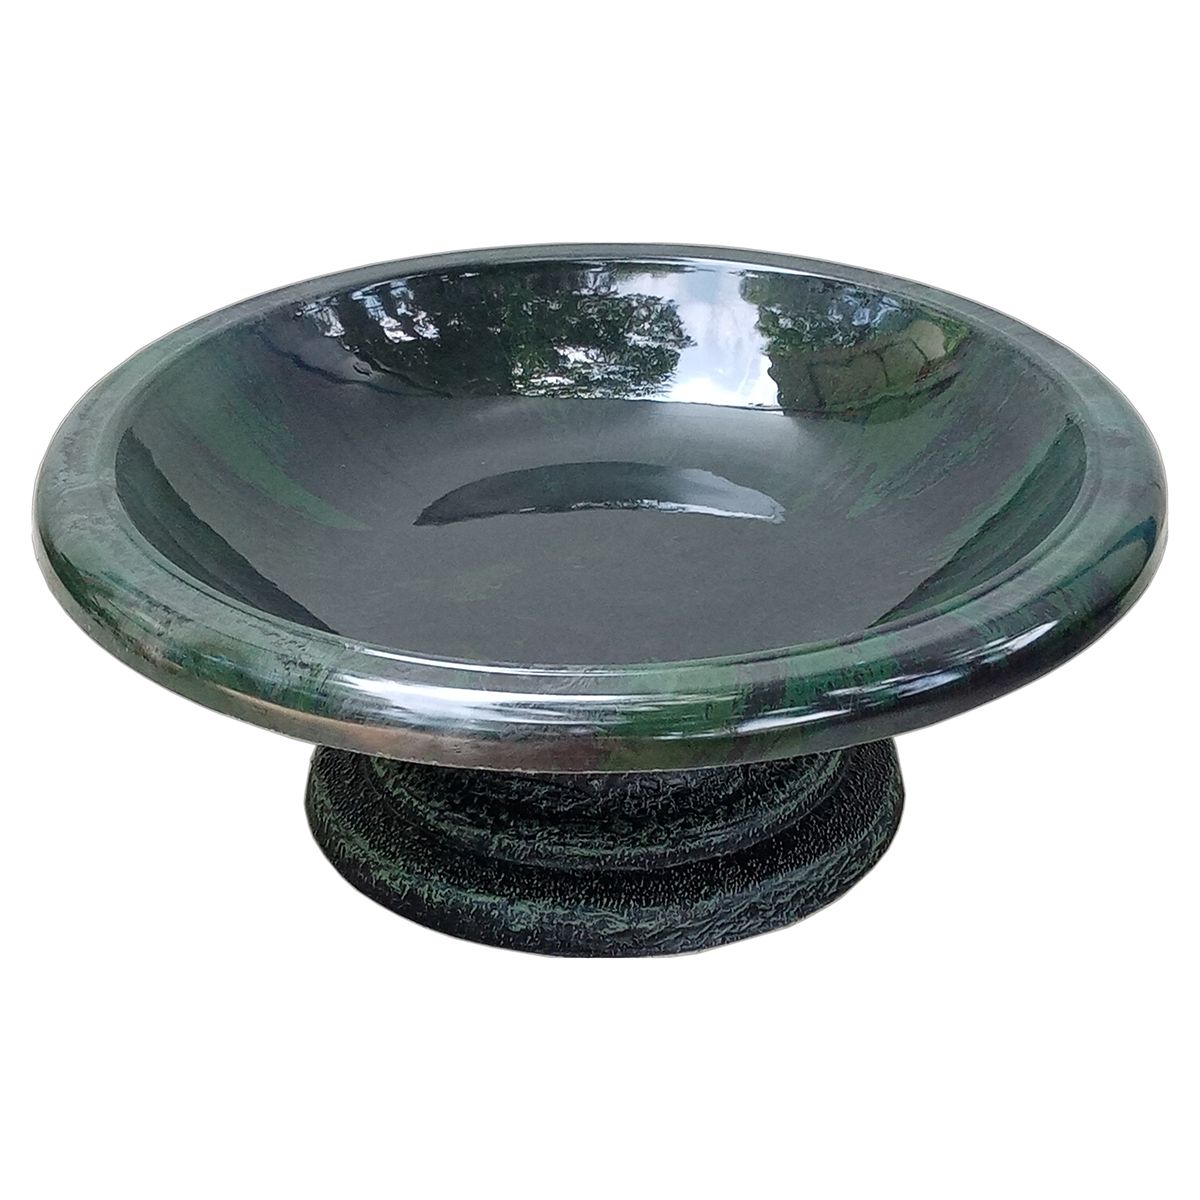 Picture of TDI Brands TDI41889 Fiber Clay Bird Bowl with Base  Hunter Green - Small